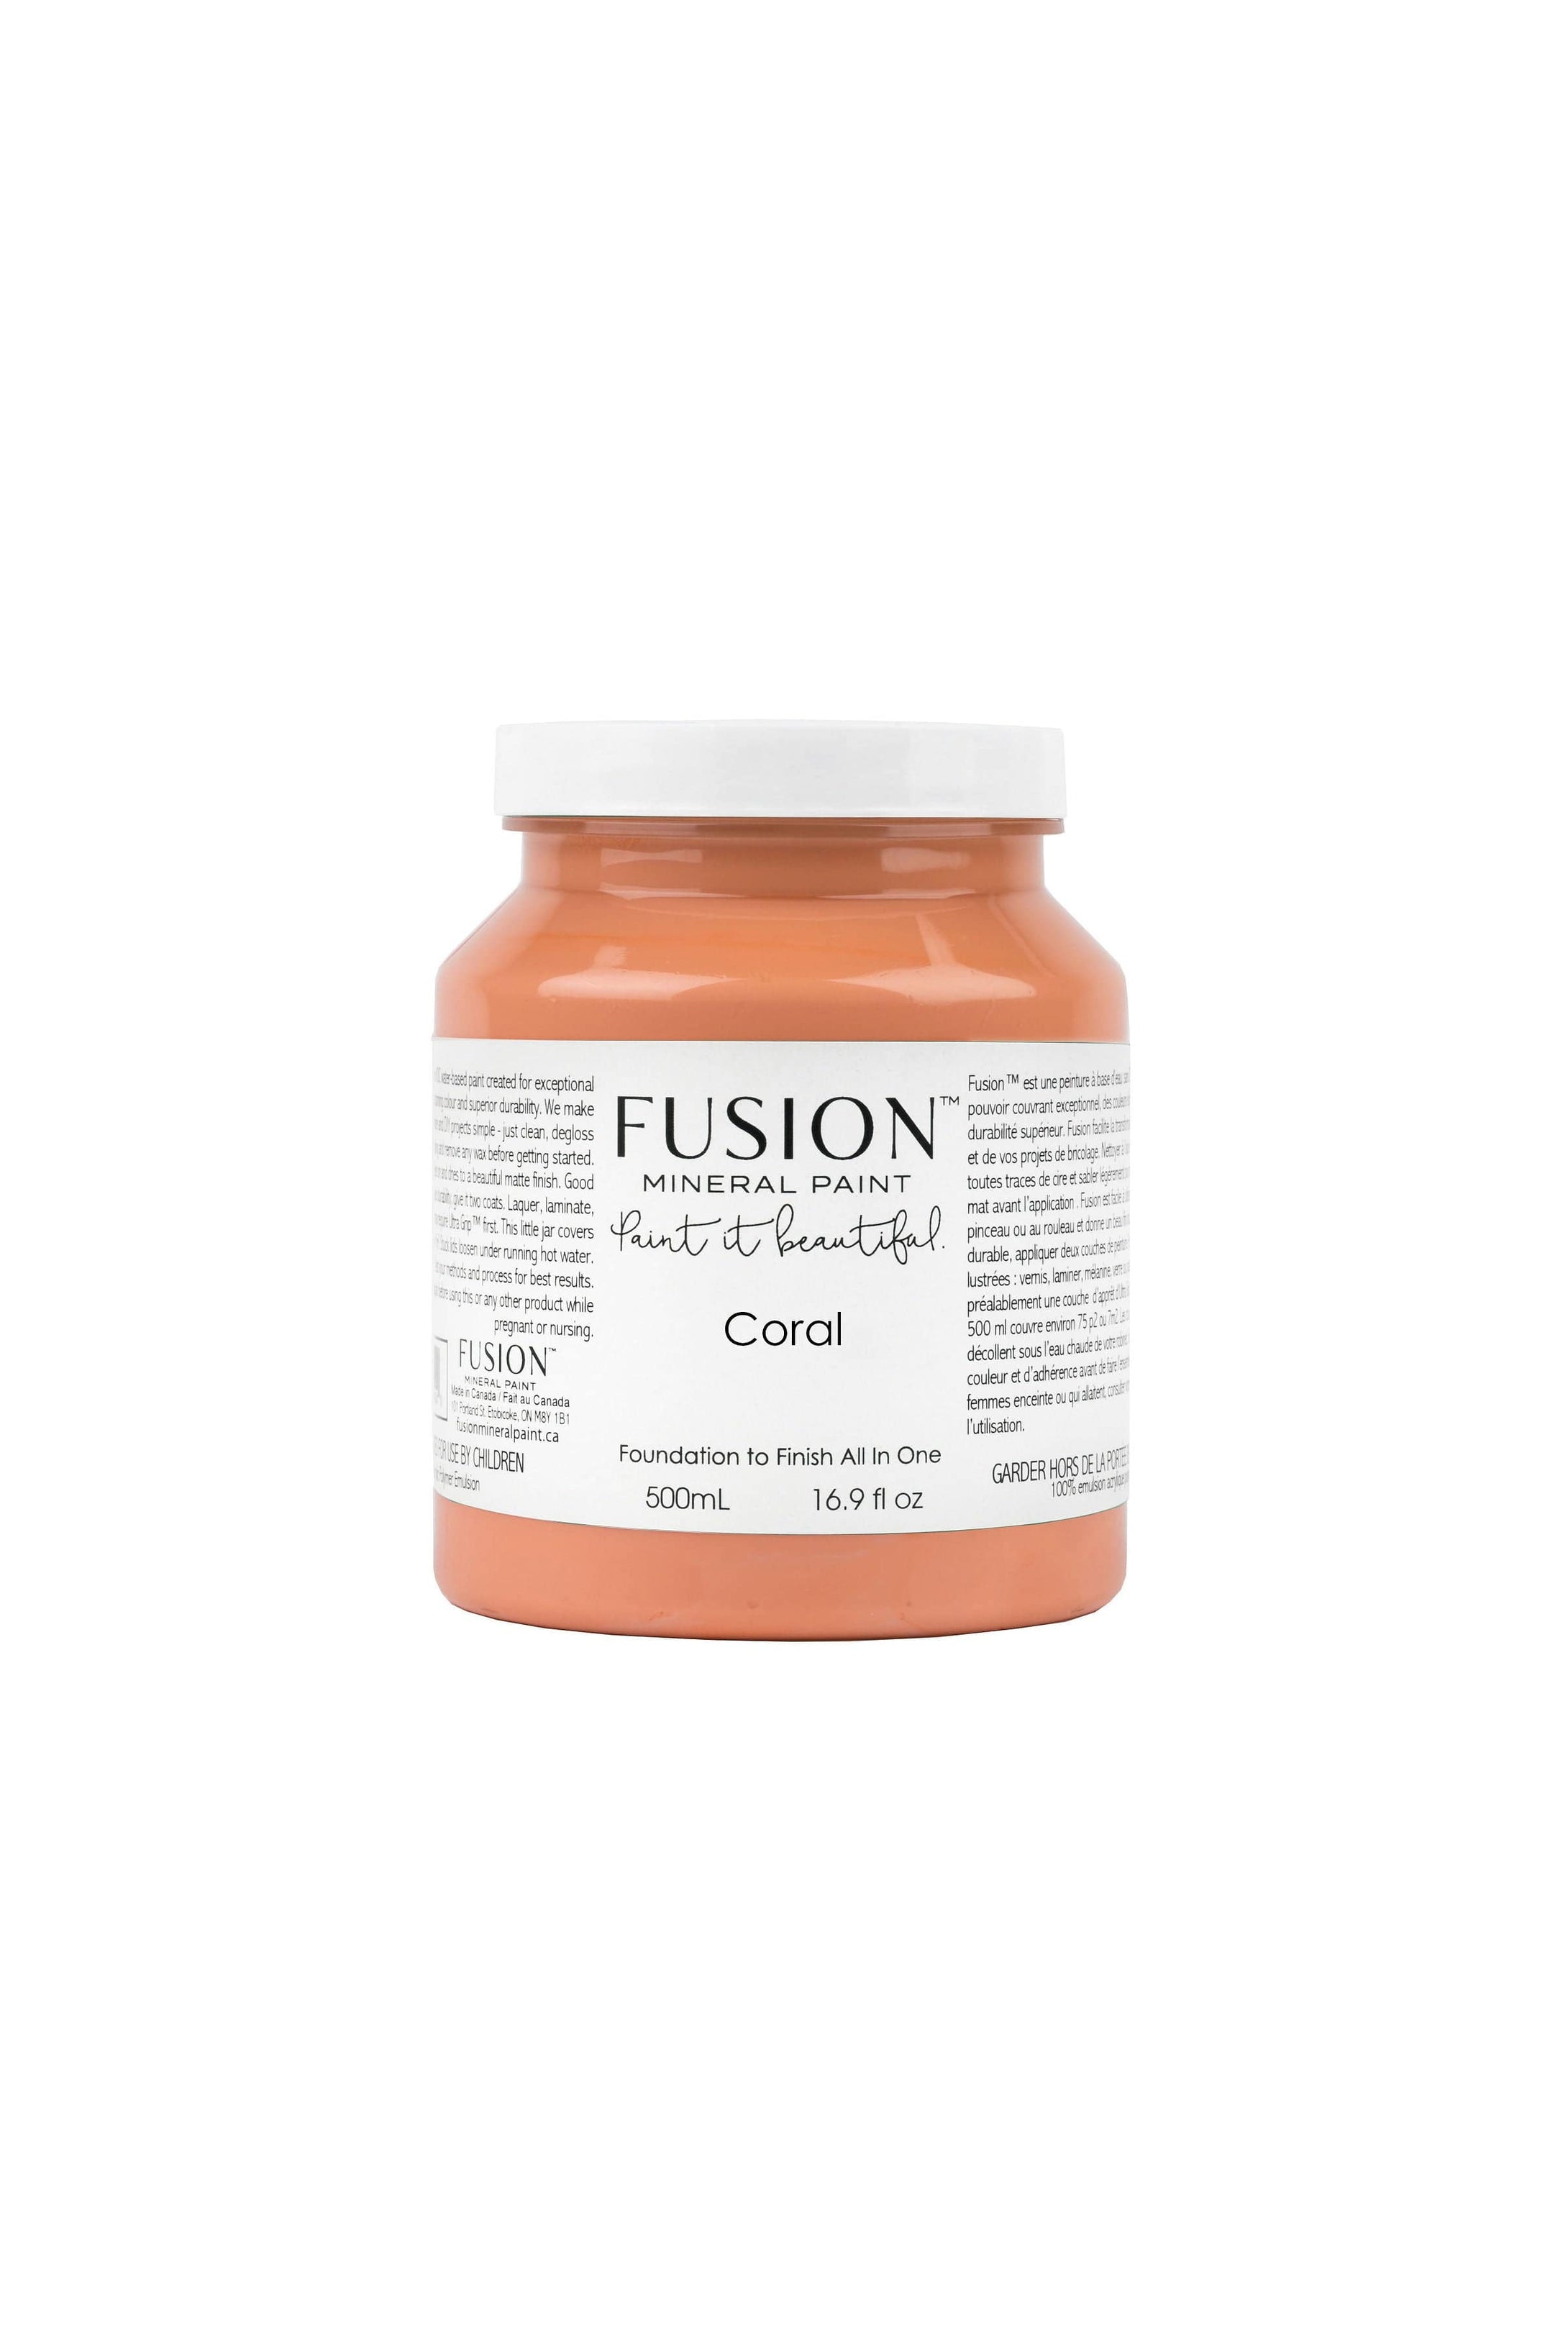 Fusion Fusion Mineral Paint Pint 500mil or 16.9oz Fusion Mineral Paint - Coral